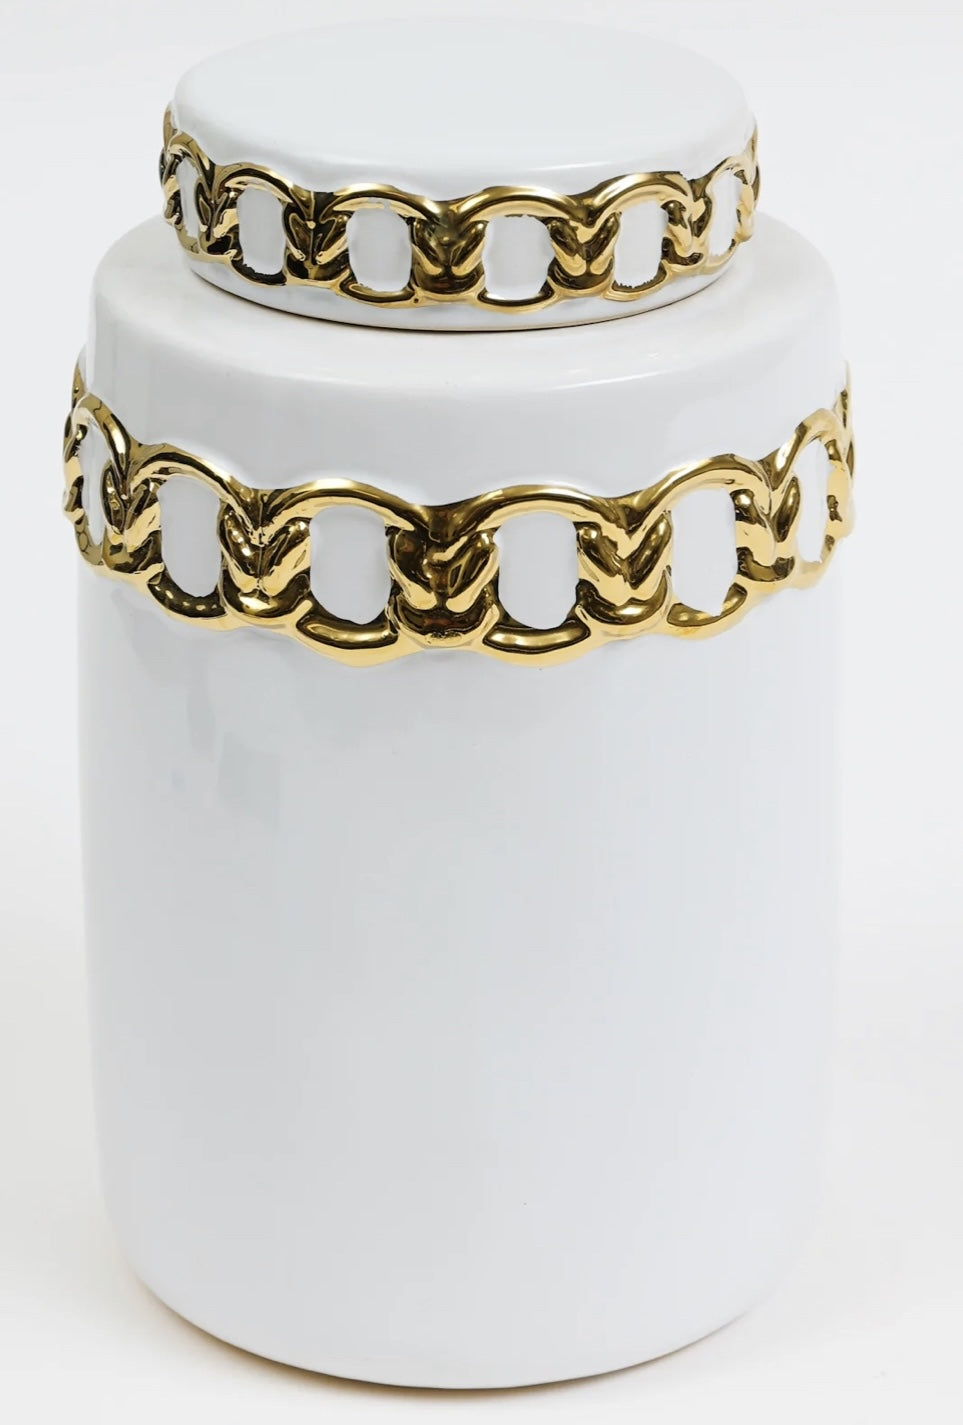 White Ceramic Jar With Gold Chain Details (3 Sizes)